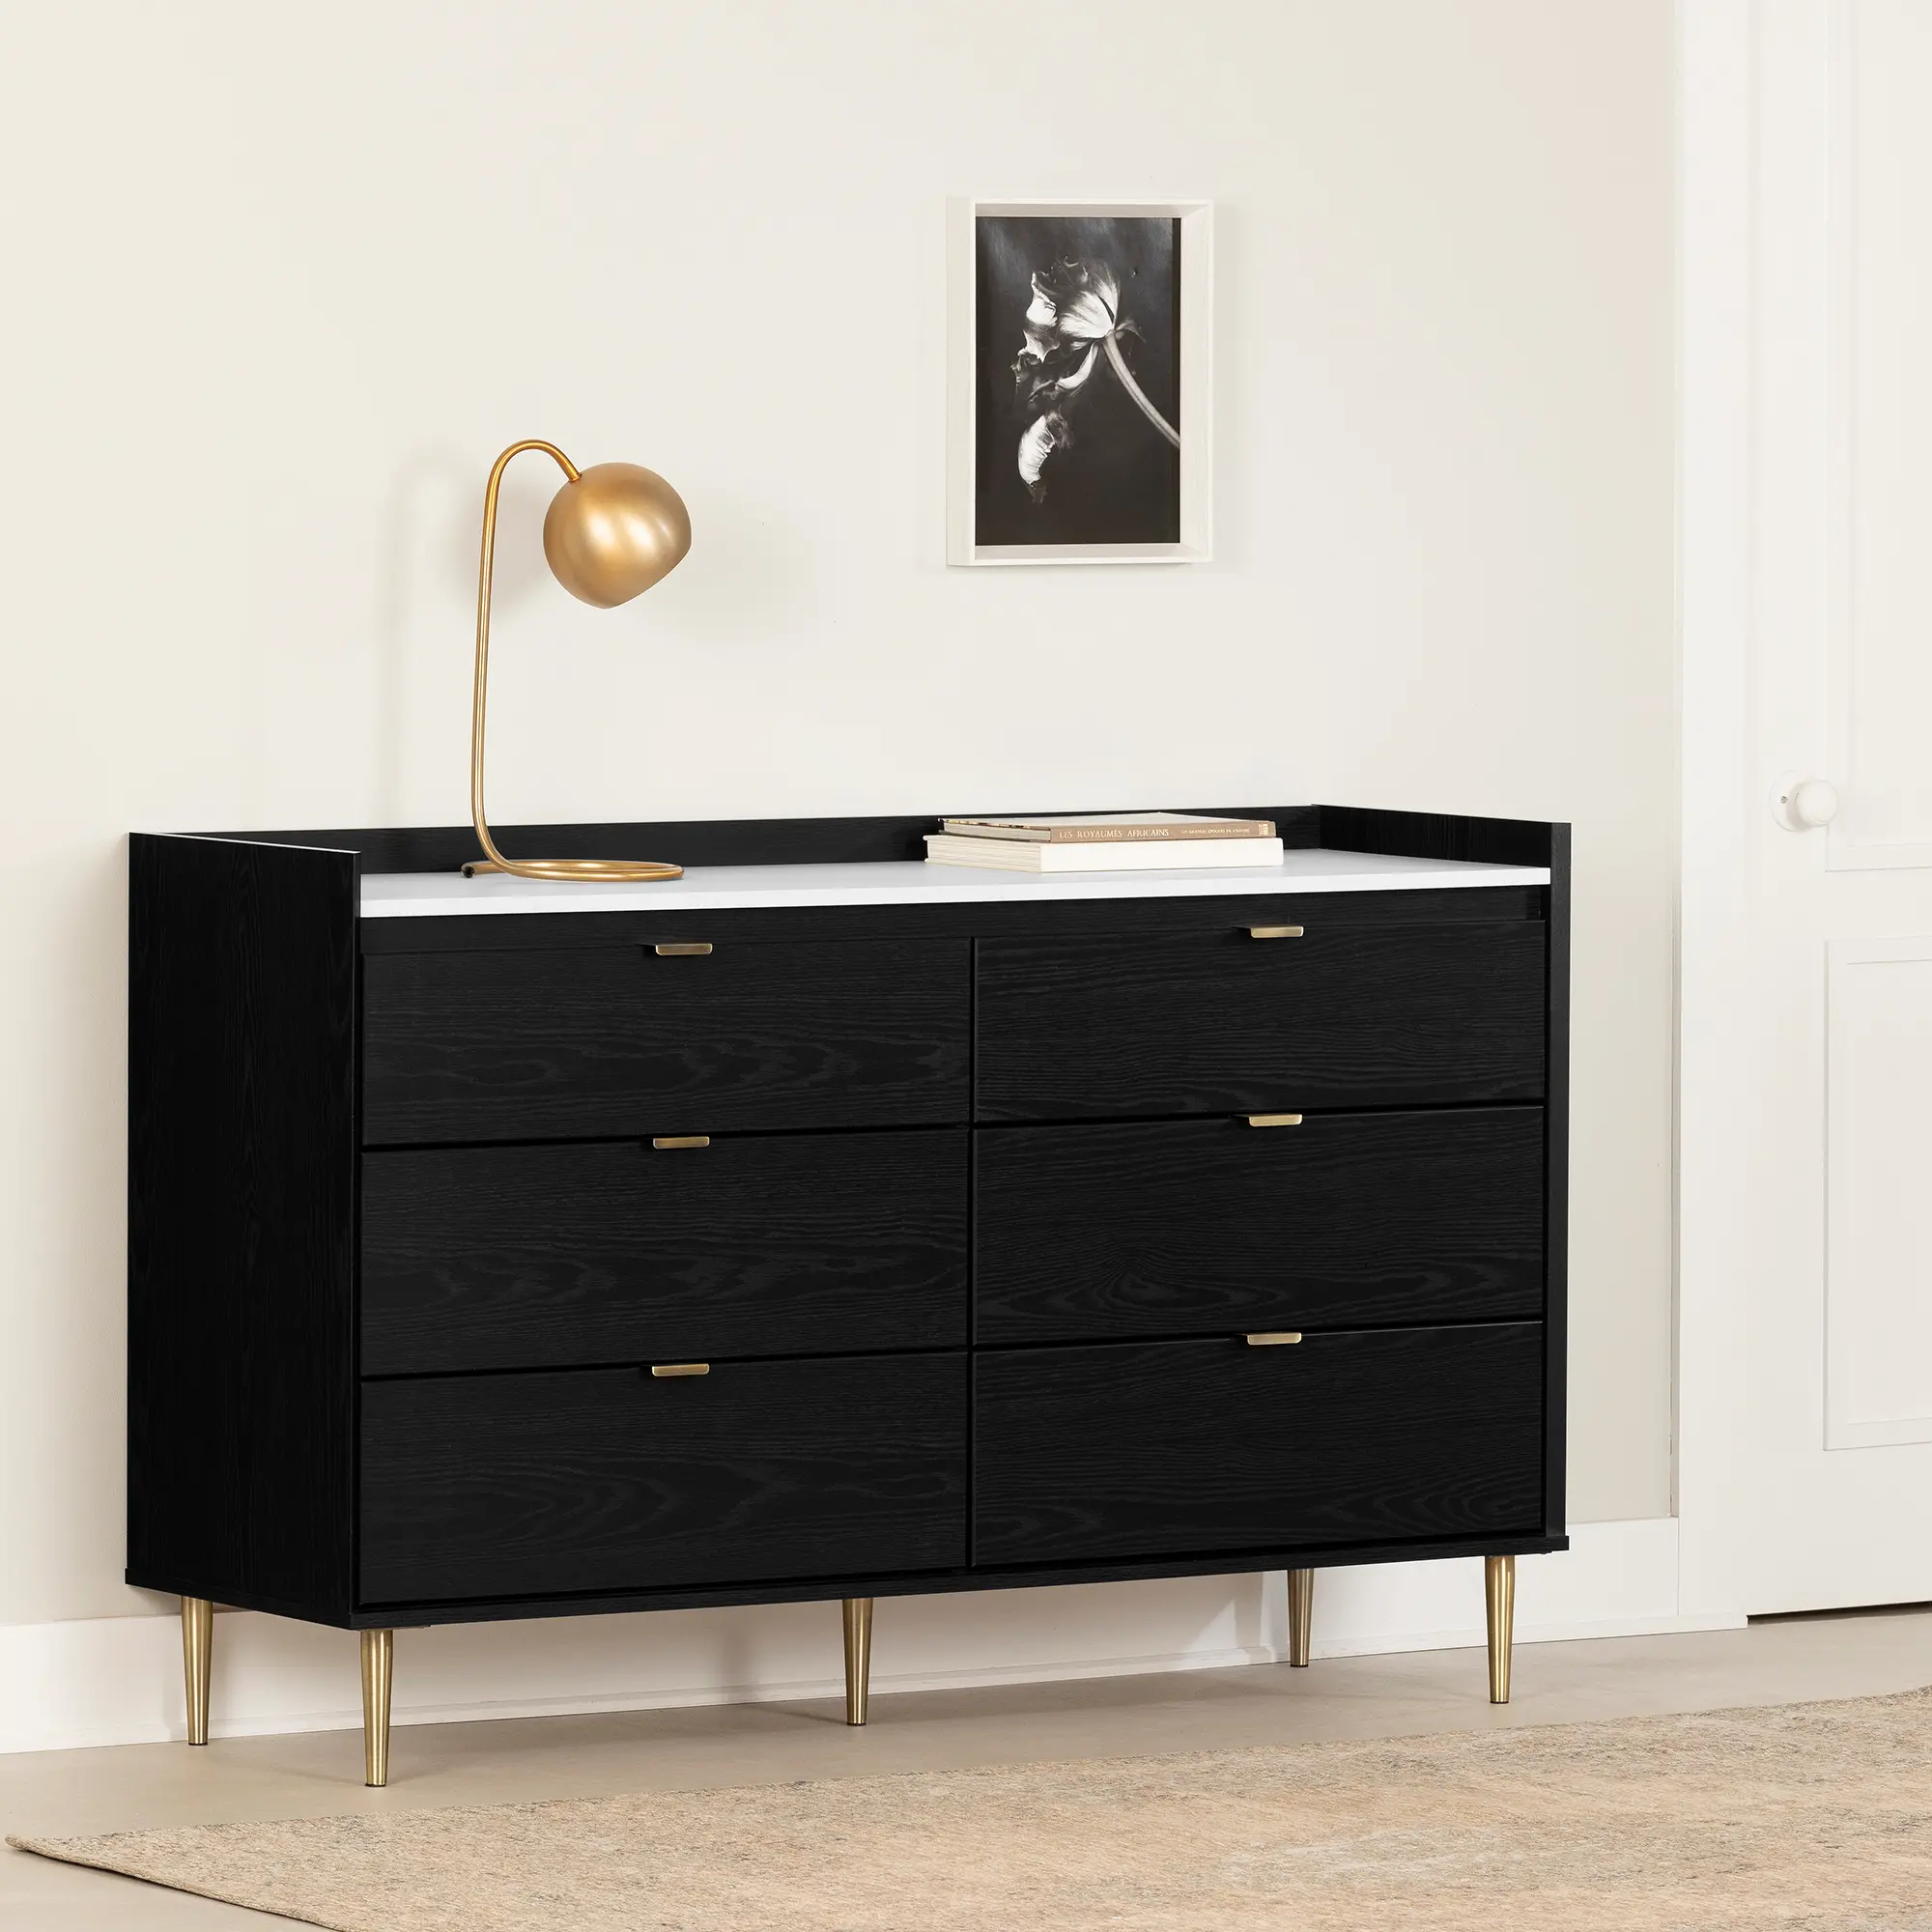 Photos - Wall Mirror South Shore Hype Black and Carrara Marble 6-Drawer Double Dresser - South